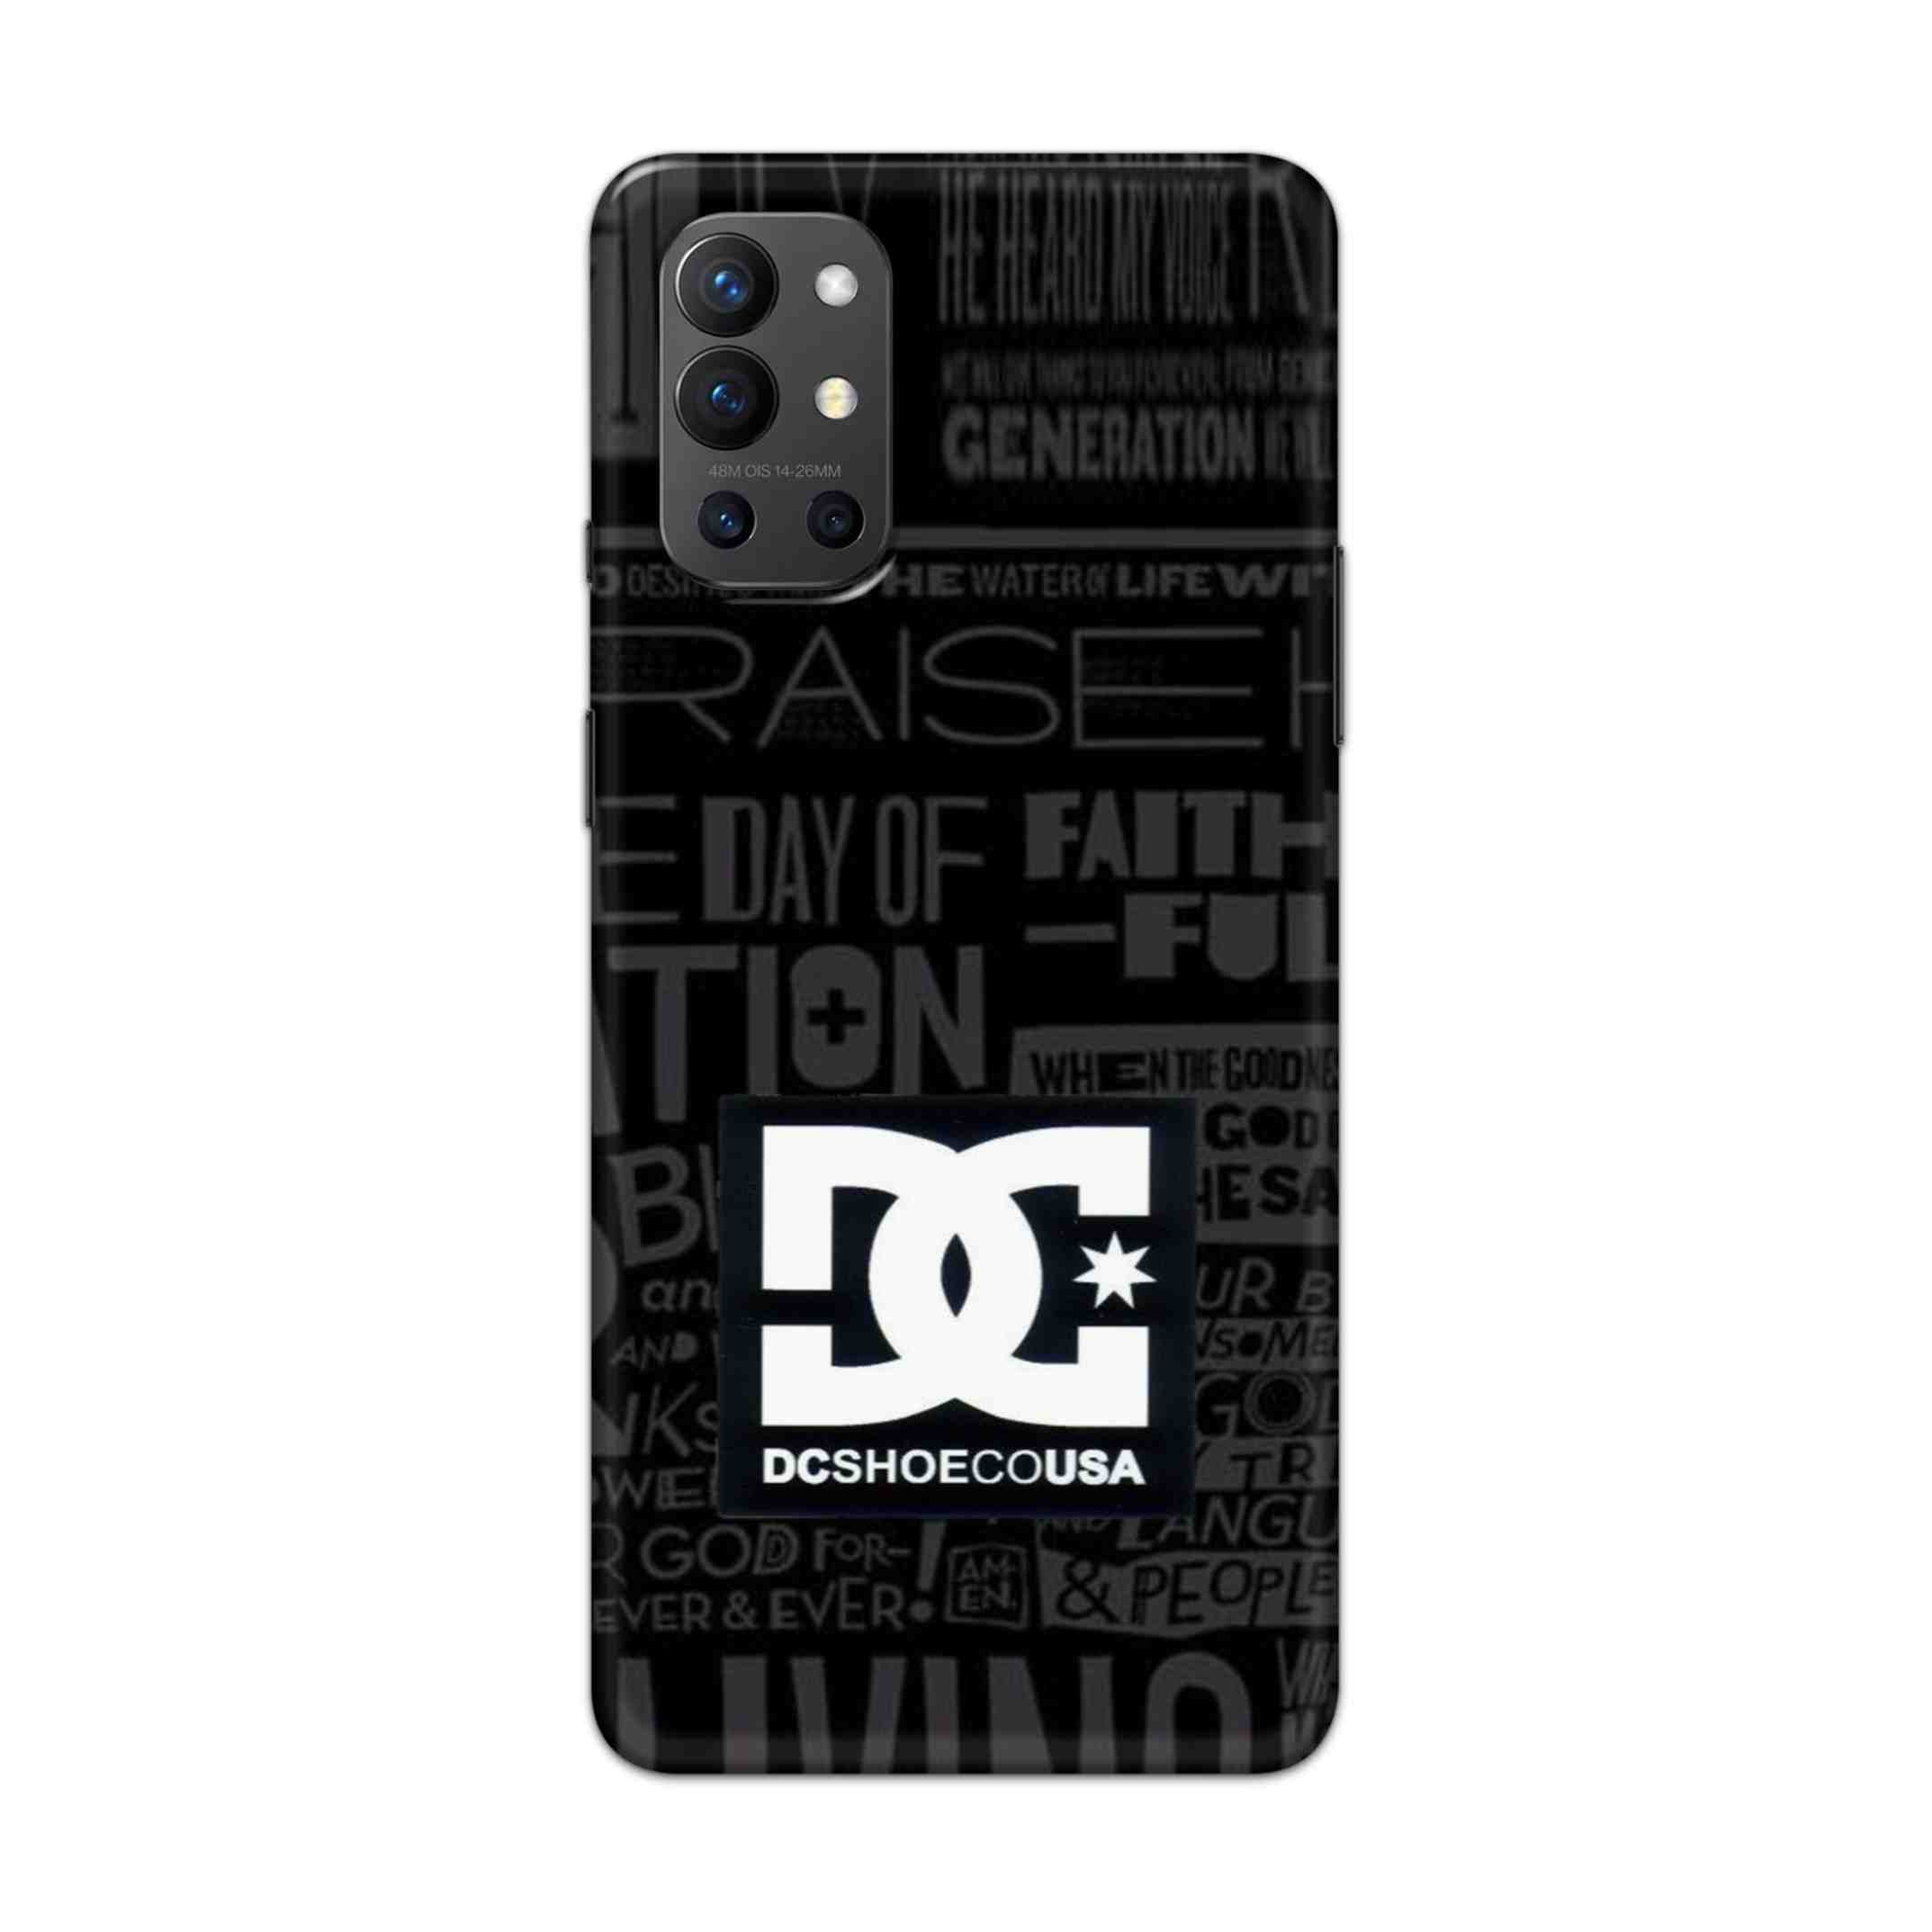 Buy Dc Shoecousa Hard Back Mobile Phone Case Cover For OnePlus 9R / 8T Online